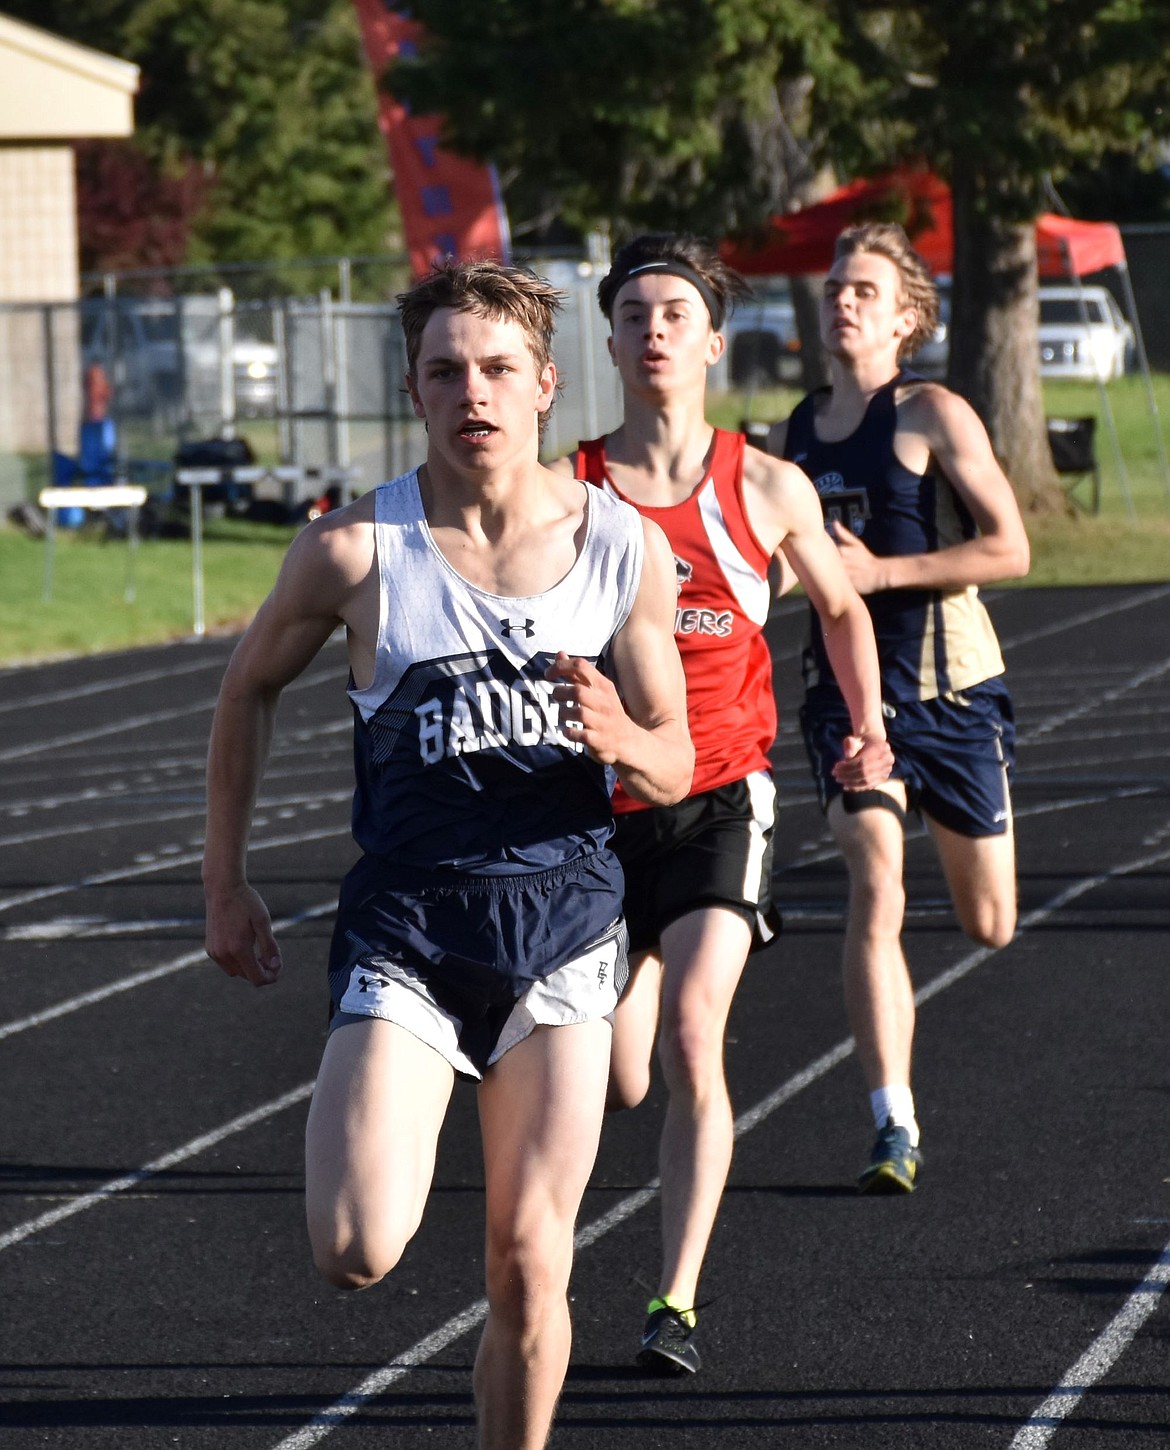 Charles Henslee running the 800 meter at Districts. He went on be the 3A 1600 state champion.